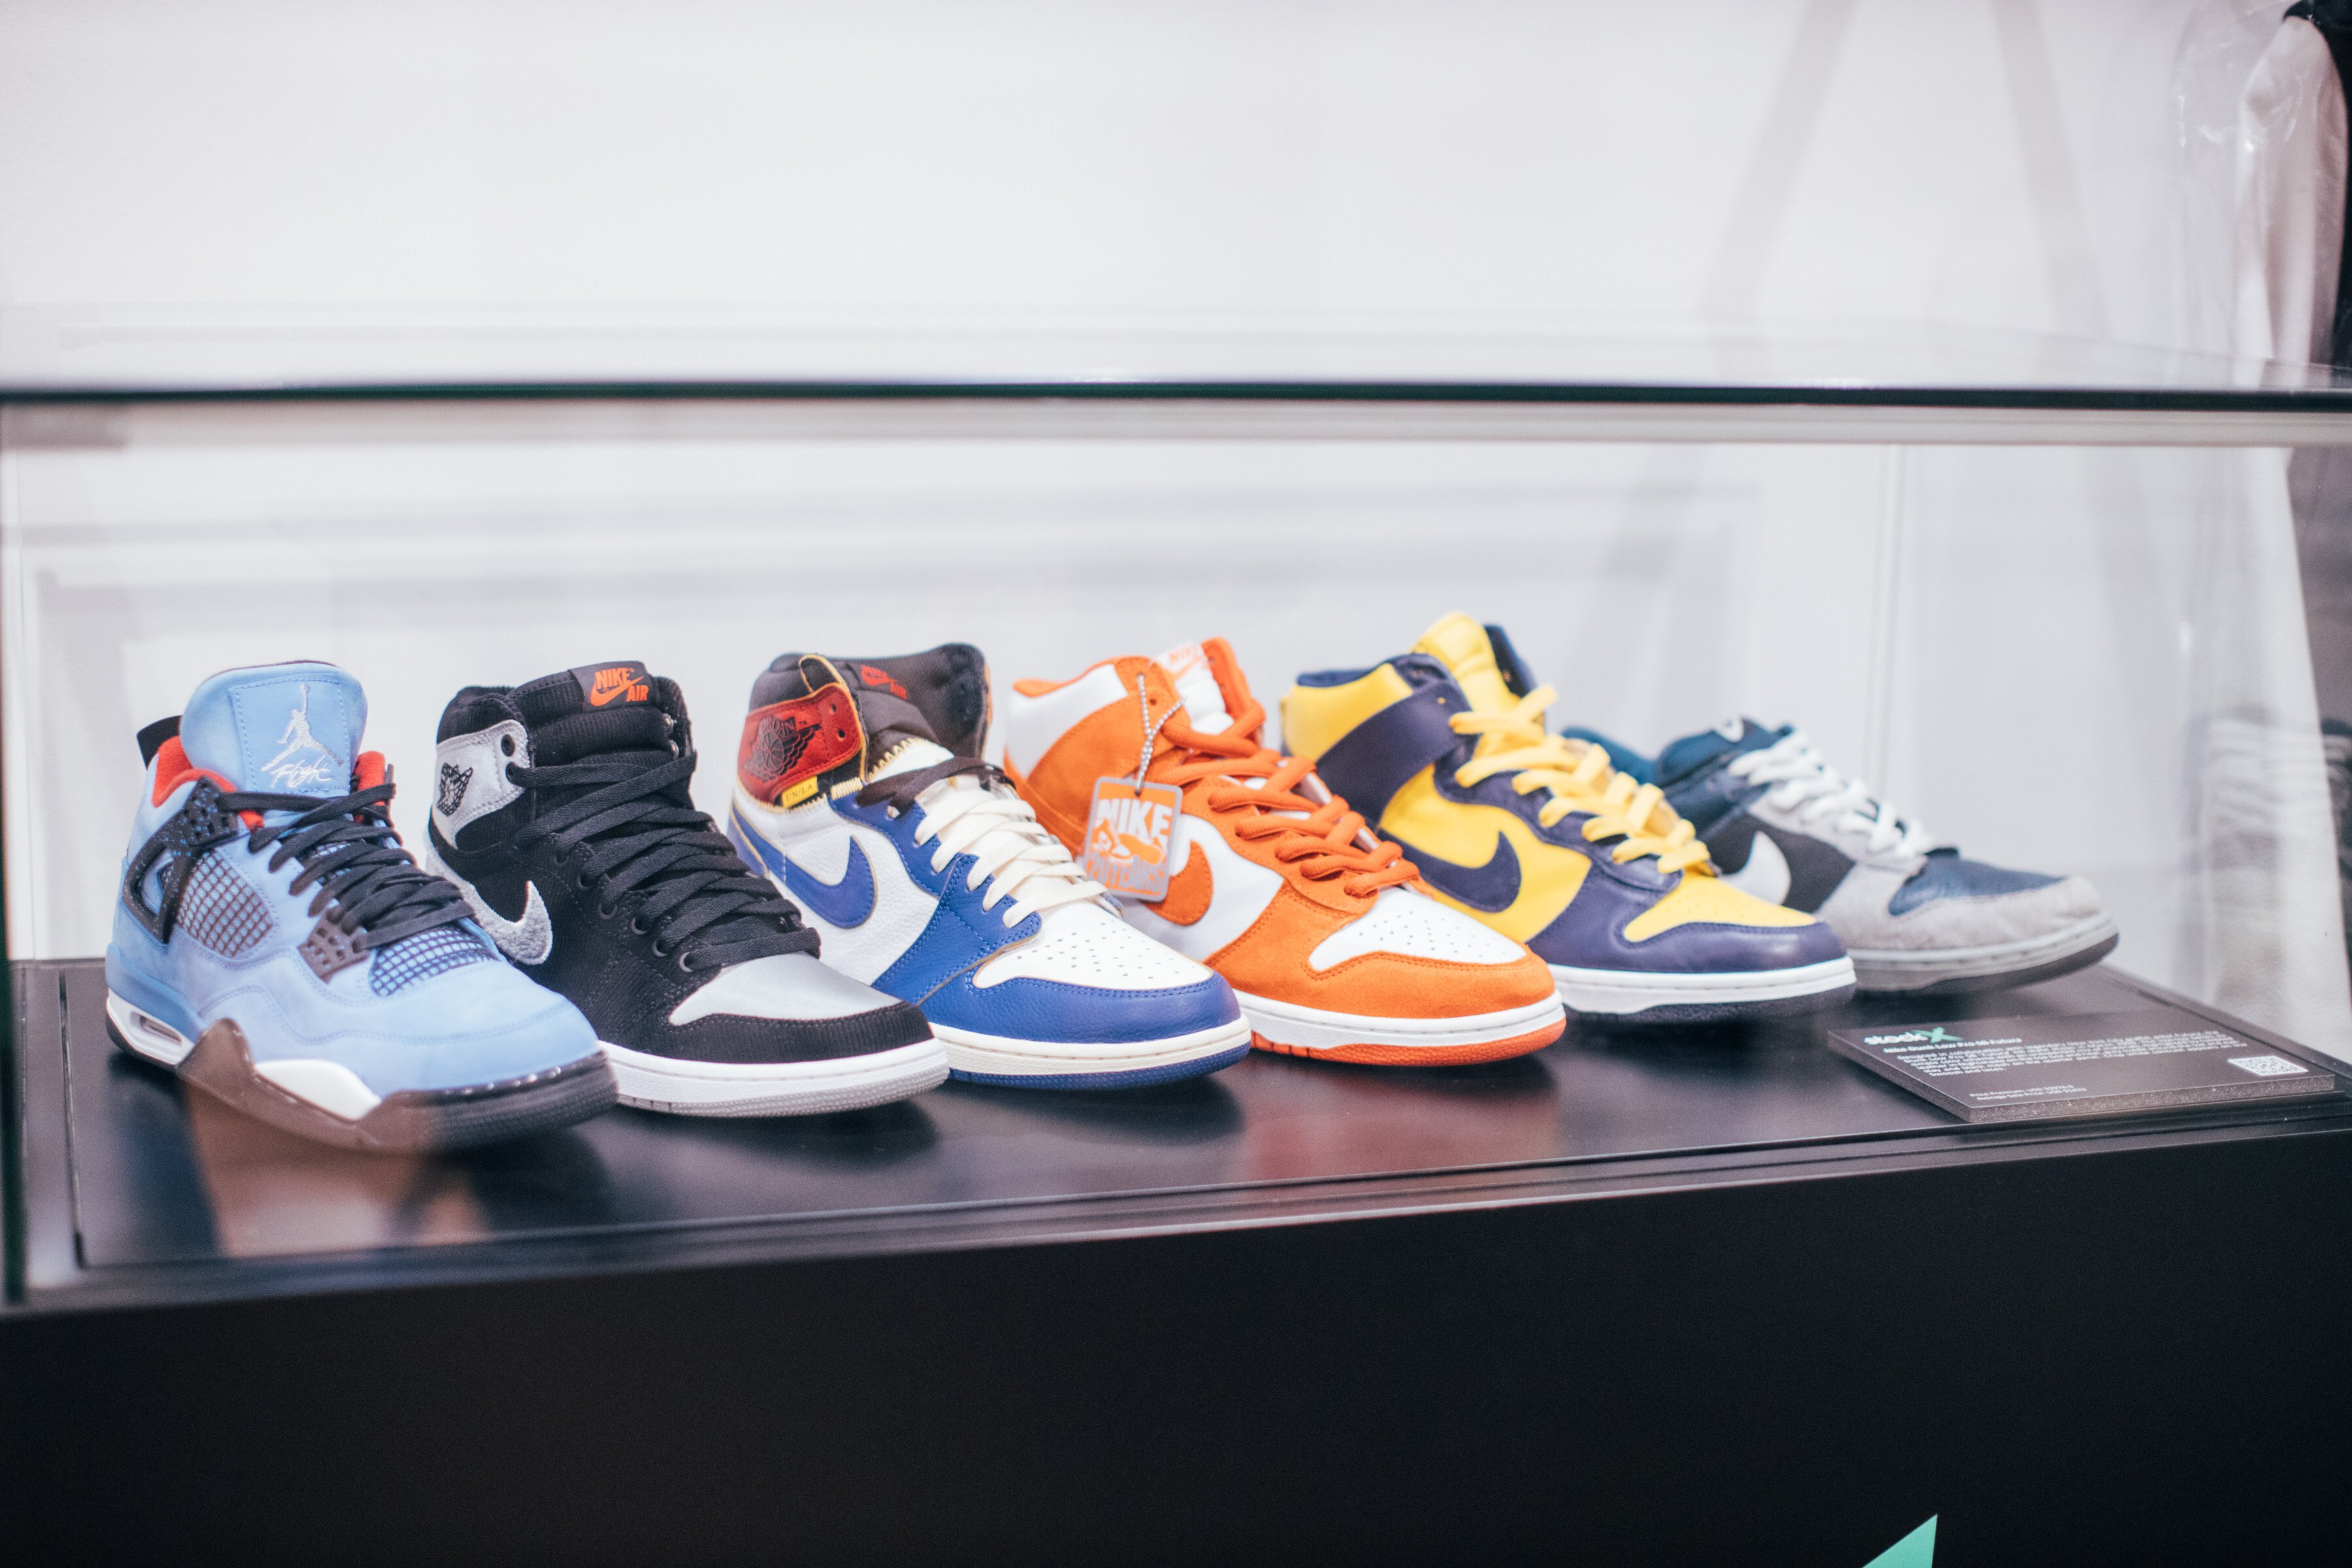 Are sneakers the next big opportunity? StockX's Scott Cutler, CEO the online collectibles marketplace, thinks so | South China Morning Post